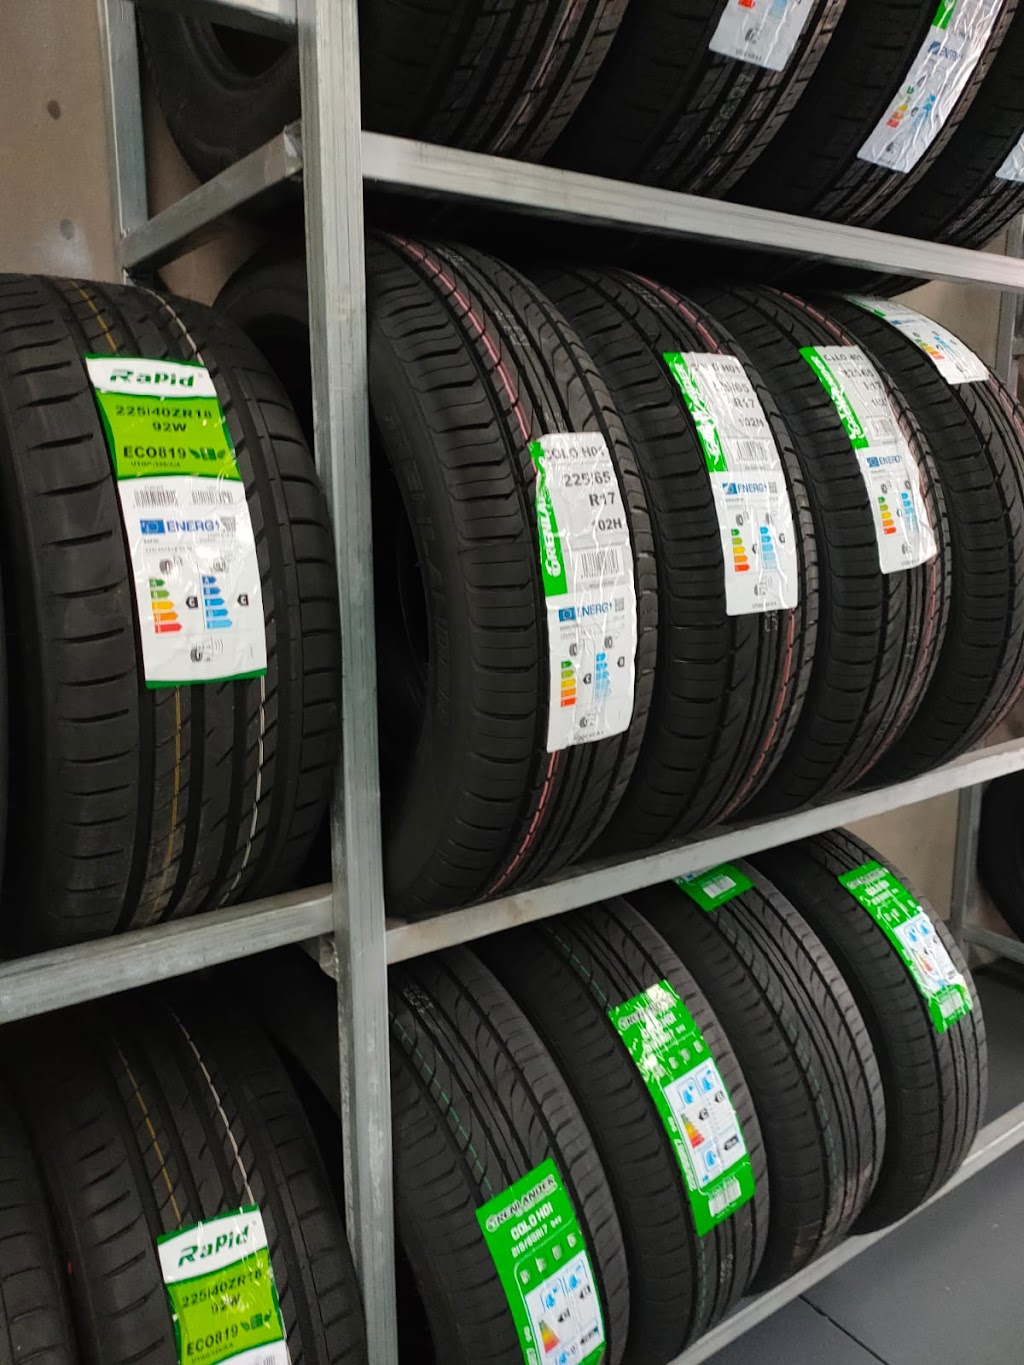 WestSide Tyres And Services | 63A St Albans Rd, St Albans VIC 3021, Australia | Phone: (03) 9041 7888